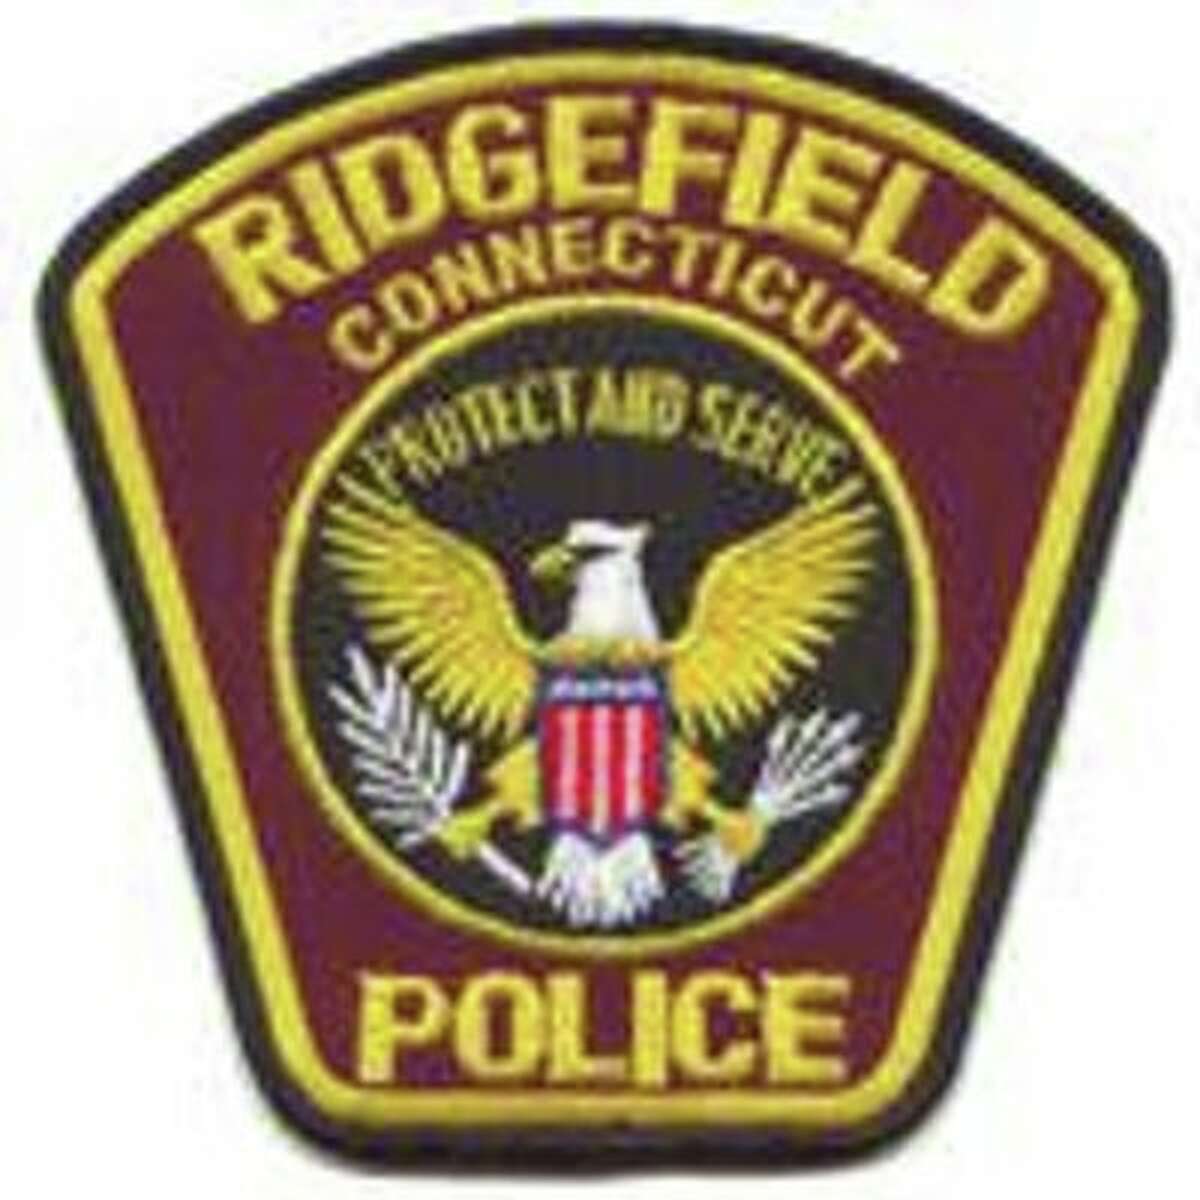 There have been three cars stolen in Ridgefield in 2019. Police are warning residents to lock their doors at night.